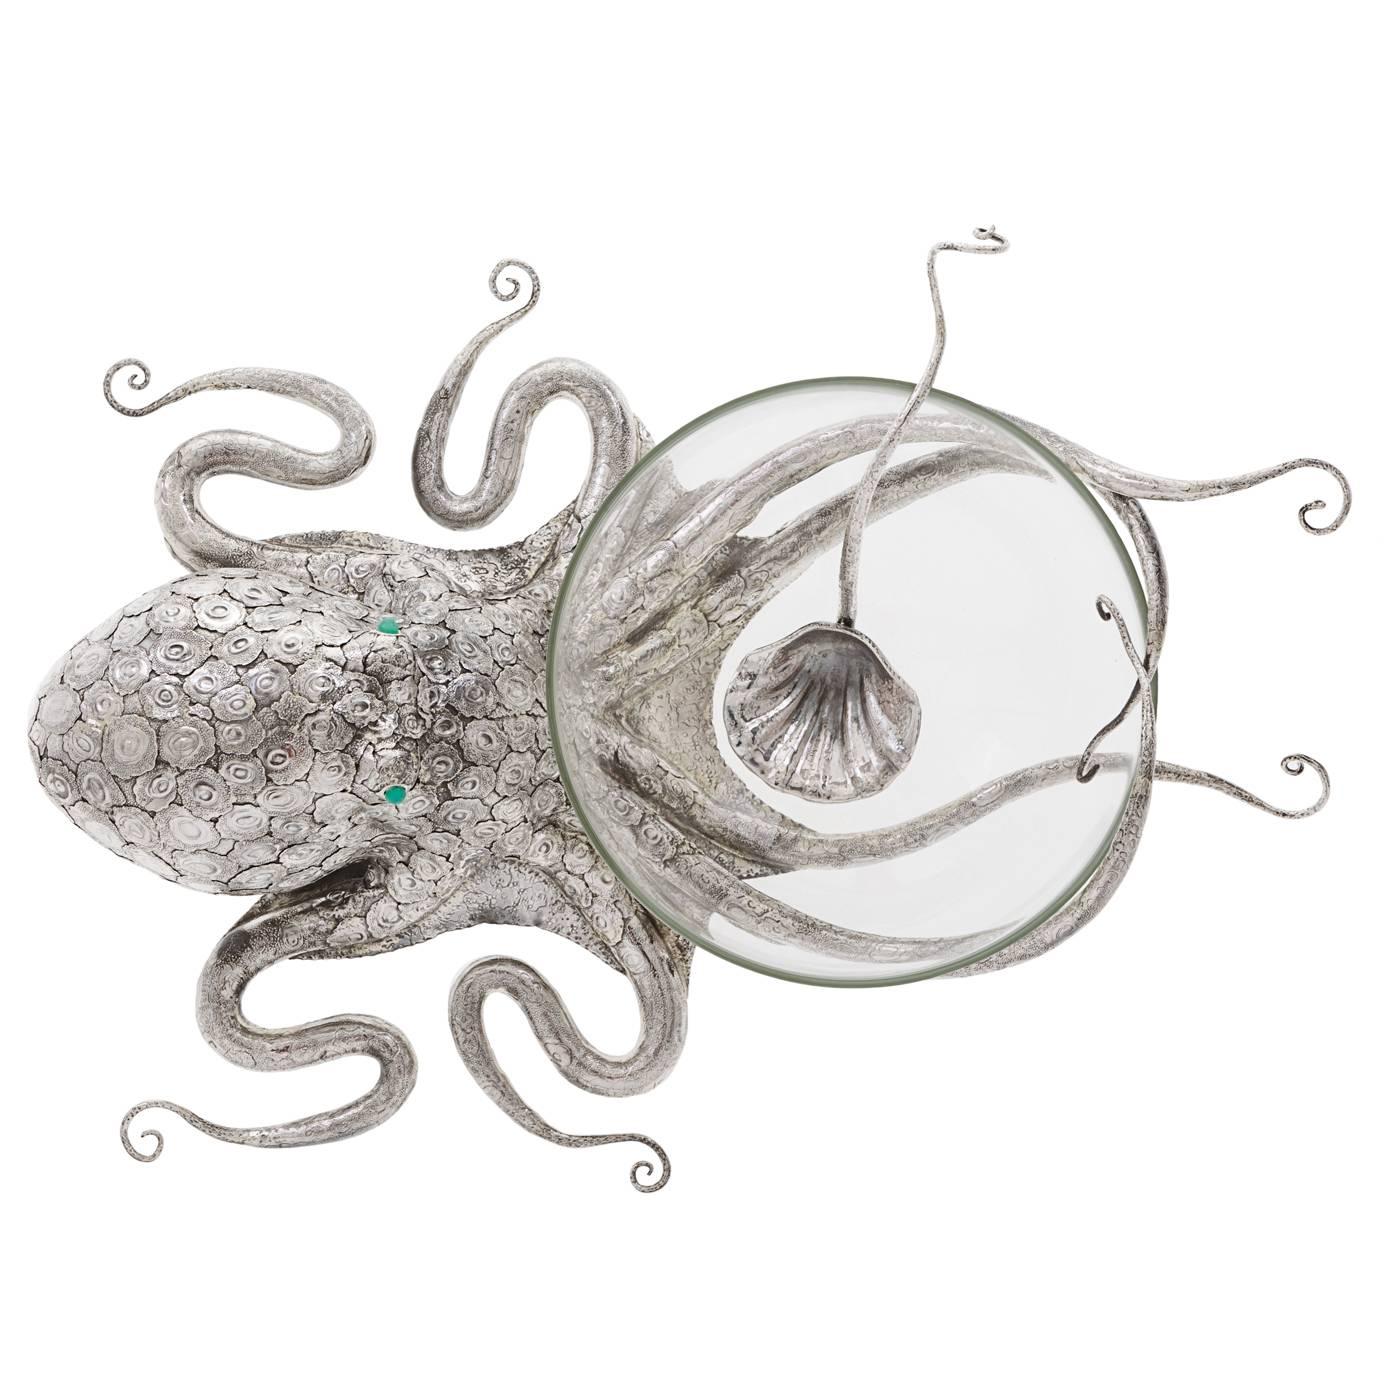 Original octopus tureen in crystal and silver, handmade by Florentine silversmiths, the Lisi Brothers. The hyper realistic centerpiece is transformed into a tureen by adding a detachable bowl. The tureen comes with a bespoke silver spoon. Due to its